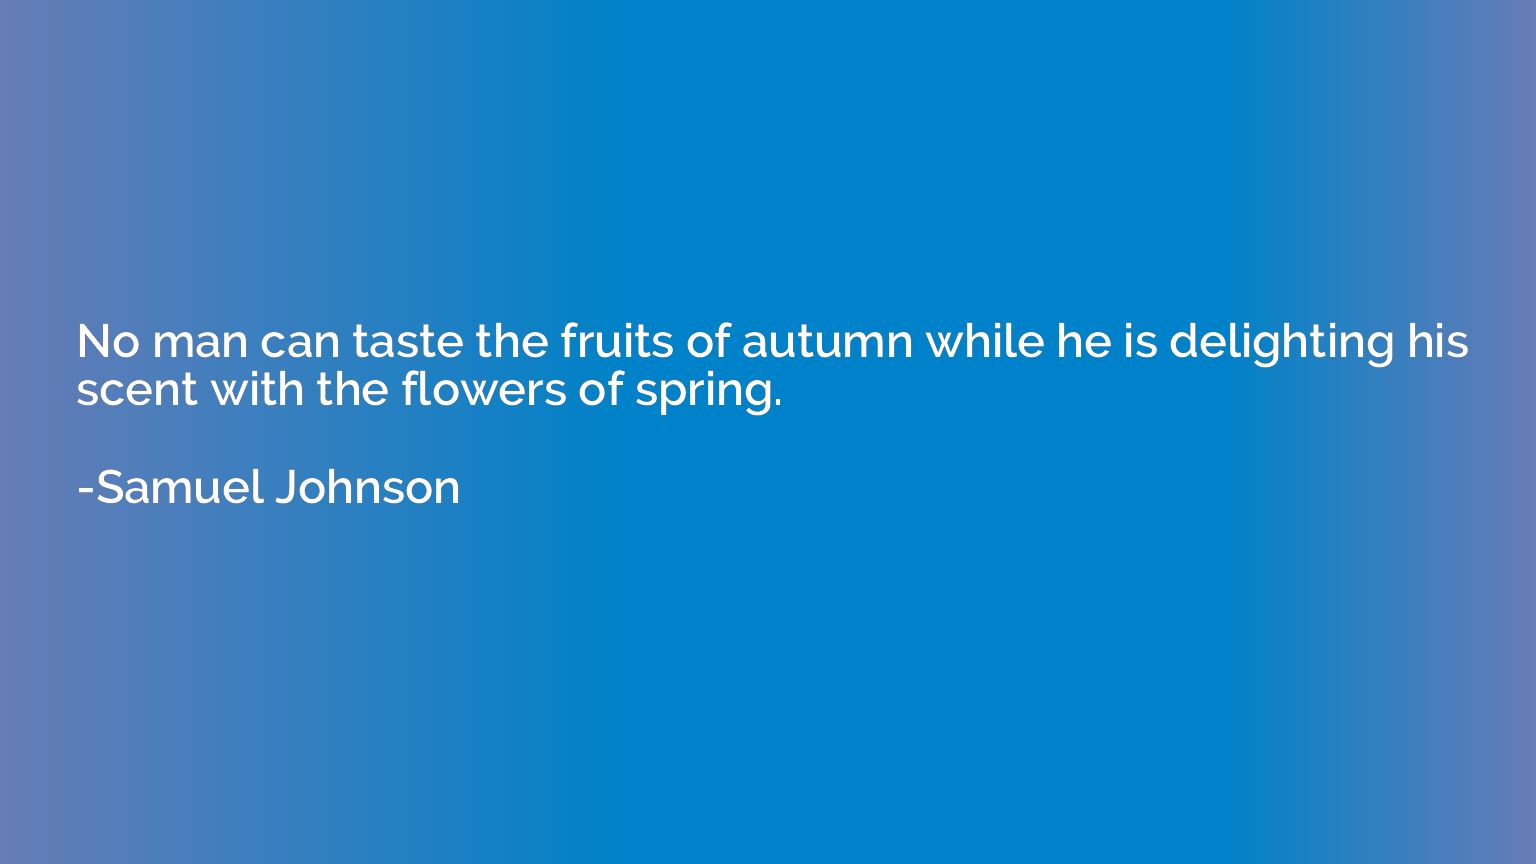 No man can taste the fruits of autumn while he is delighting